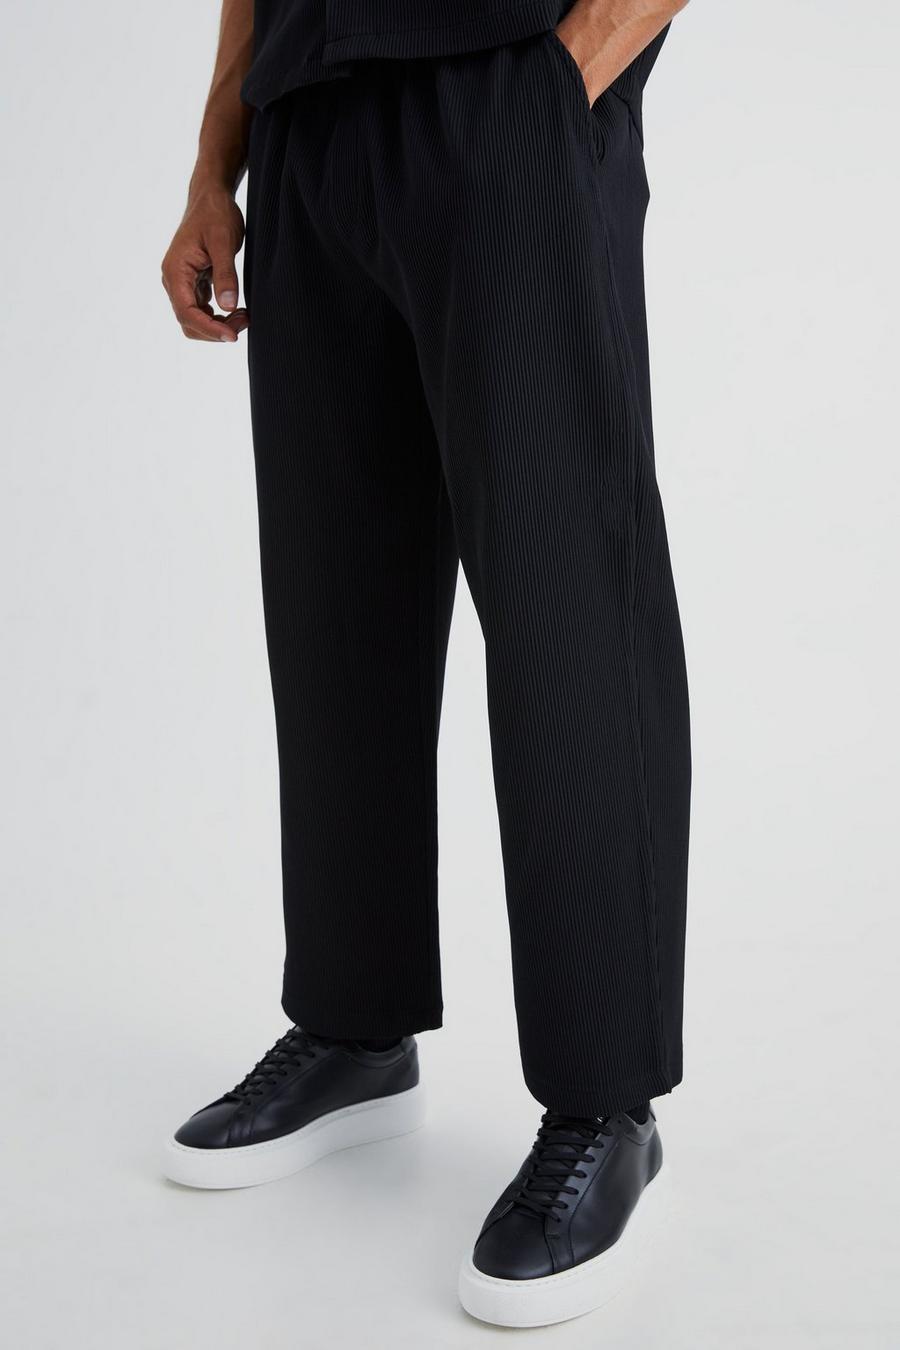 Black Elasticated Waist Relaxed Fit Cropped Pleated Trouser